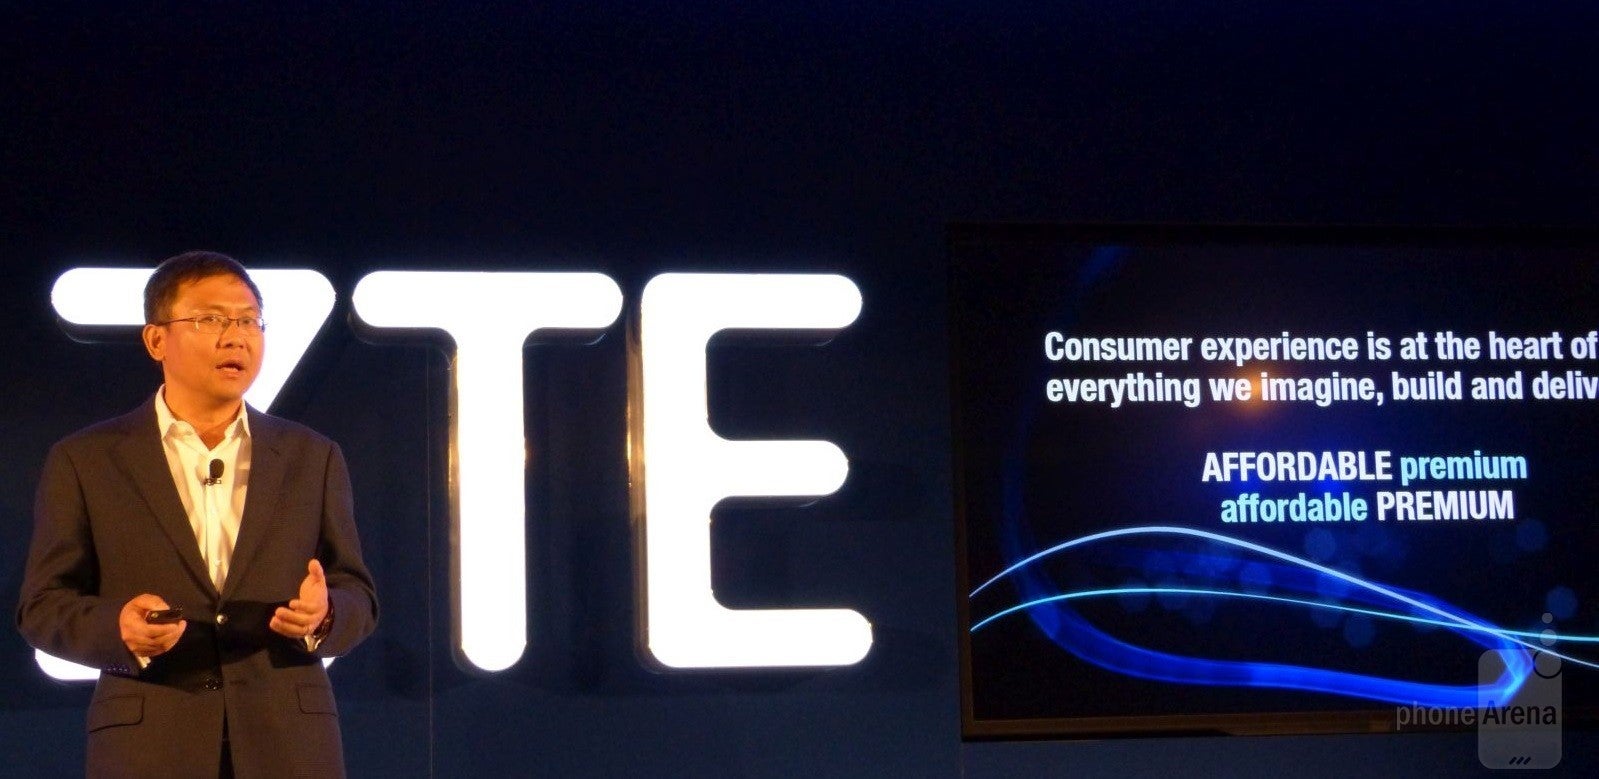 ZTE USA Chief Executive, Lixin Cheng reports on the company's performance in the US and around the world - From CES 2015 – Brands to watch in the US: ZTE (part 2 of 2)